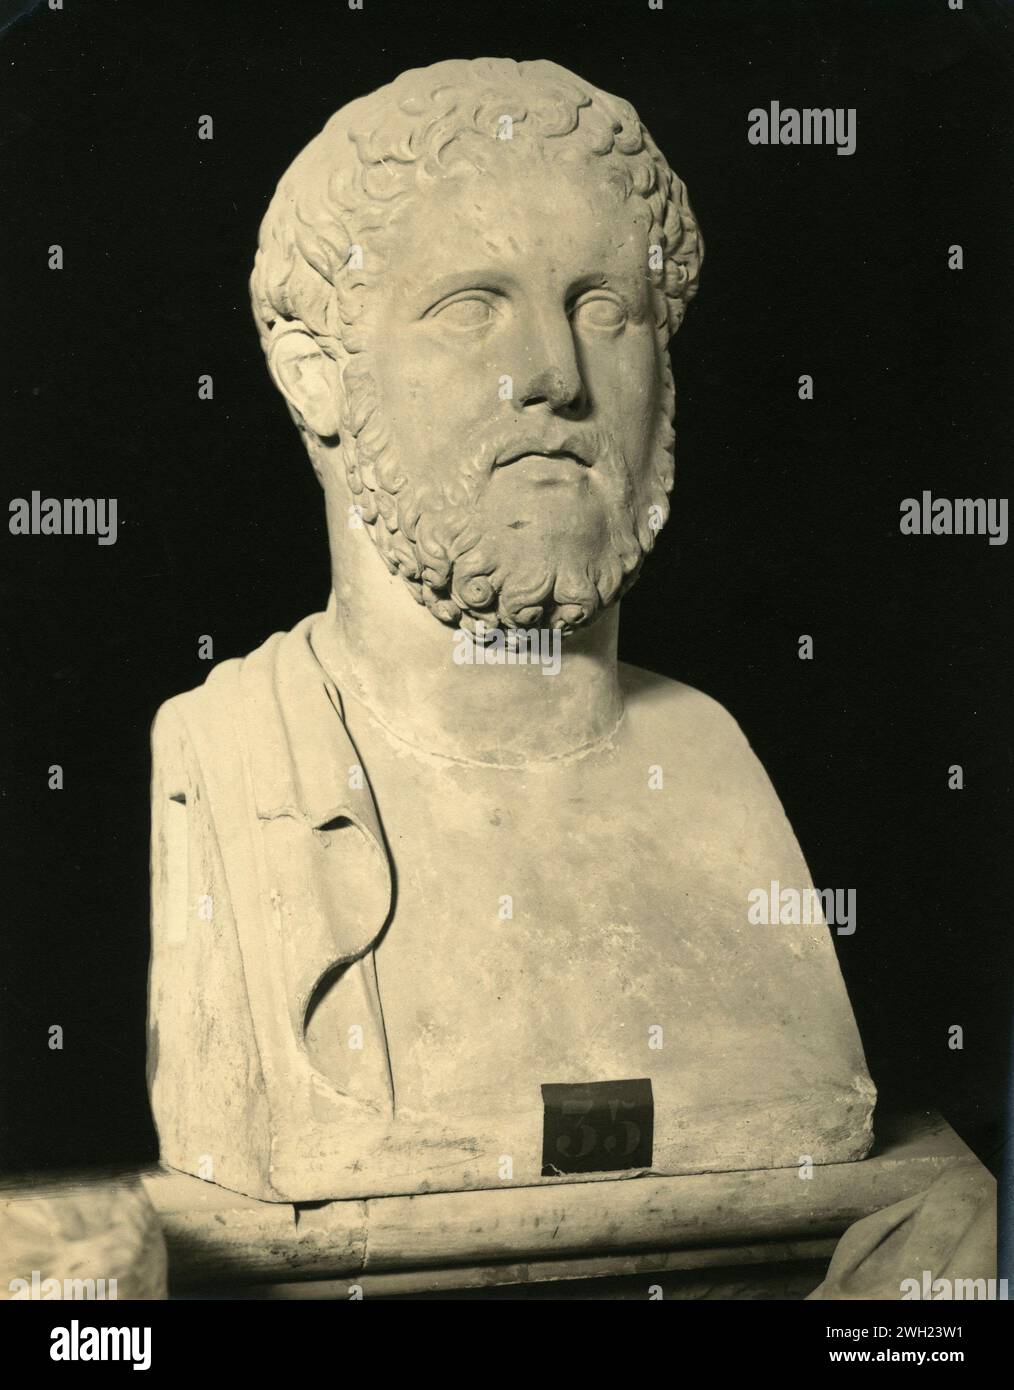 Athenian statesman and general Alcibiades, marble bust, Museo Capitolino, Rome, Italy 1900s Stock Photo